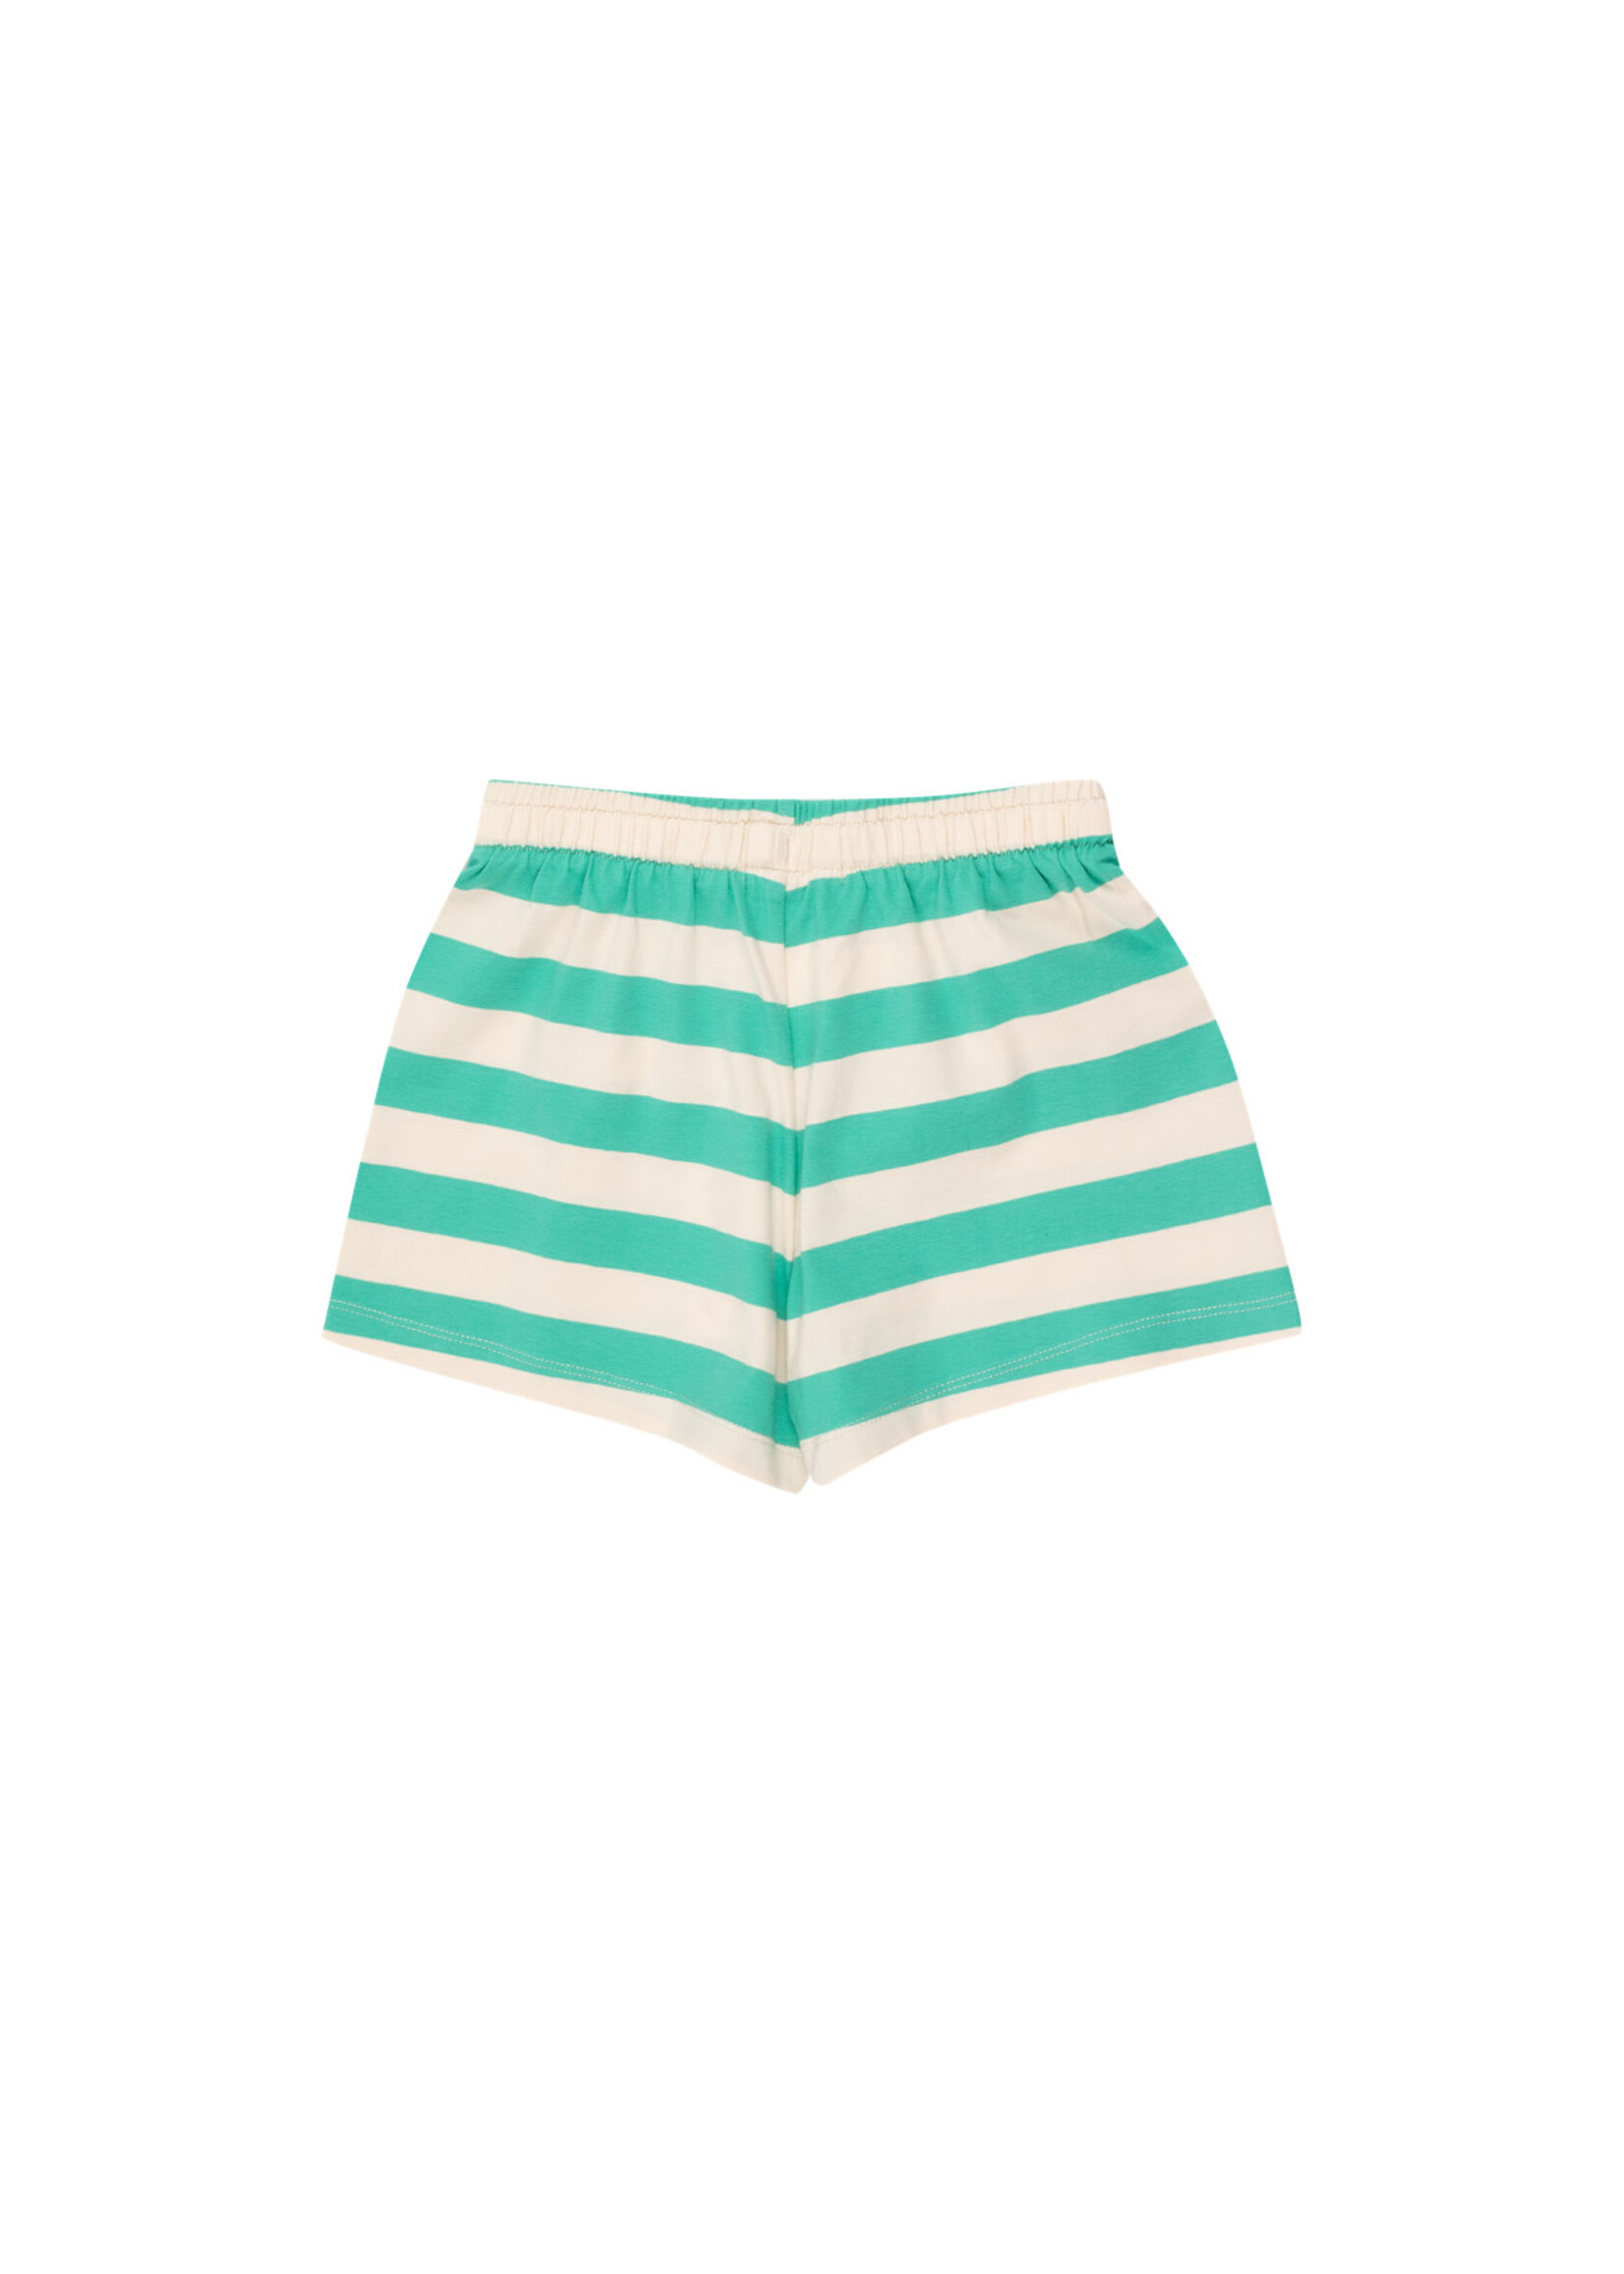 TinyCottons TinyCottons Shorts Stripes Emerald/Cream